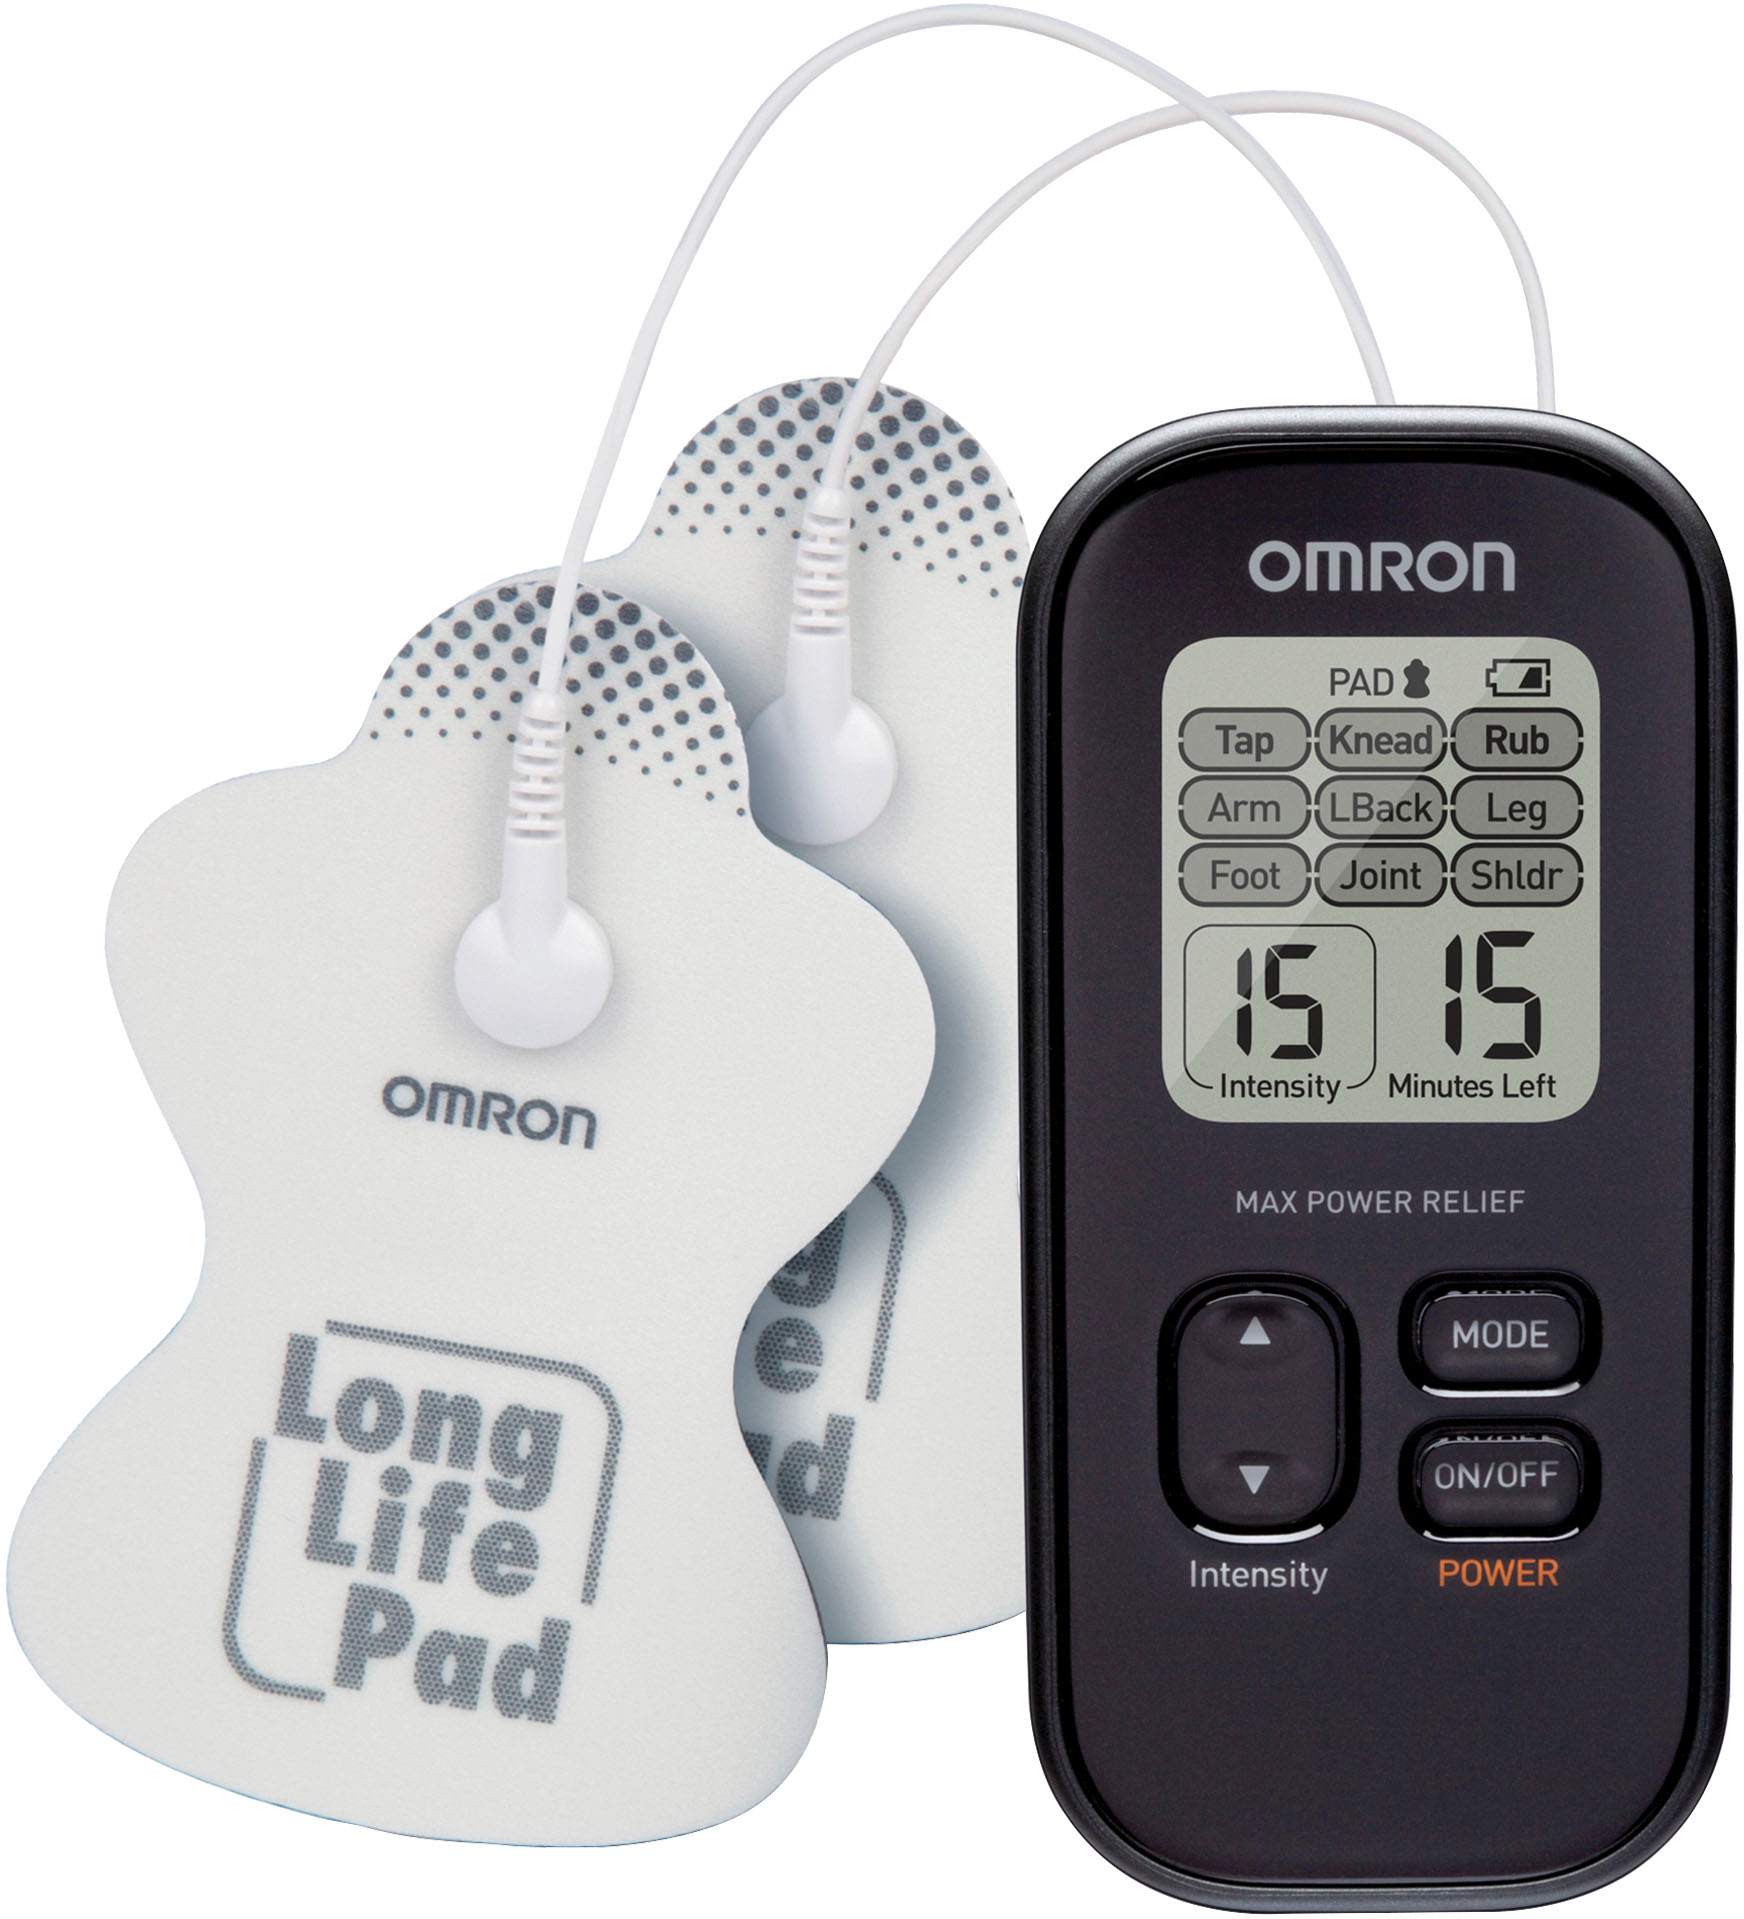 Omron Pocket Pain Pro Tens Unit & Electrotherapy Long Life Pads